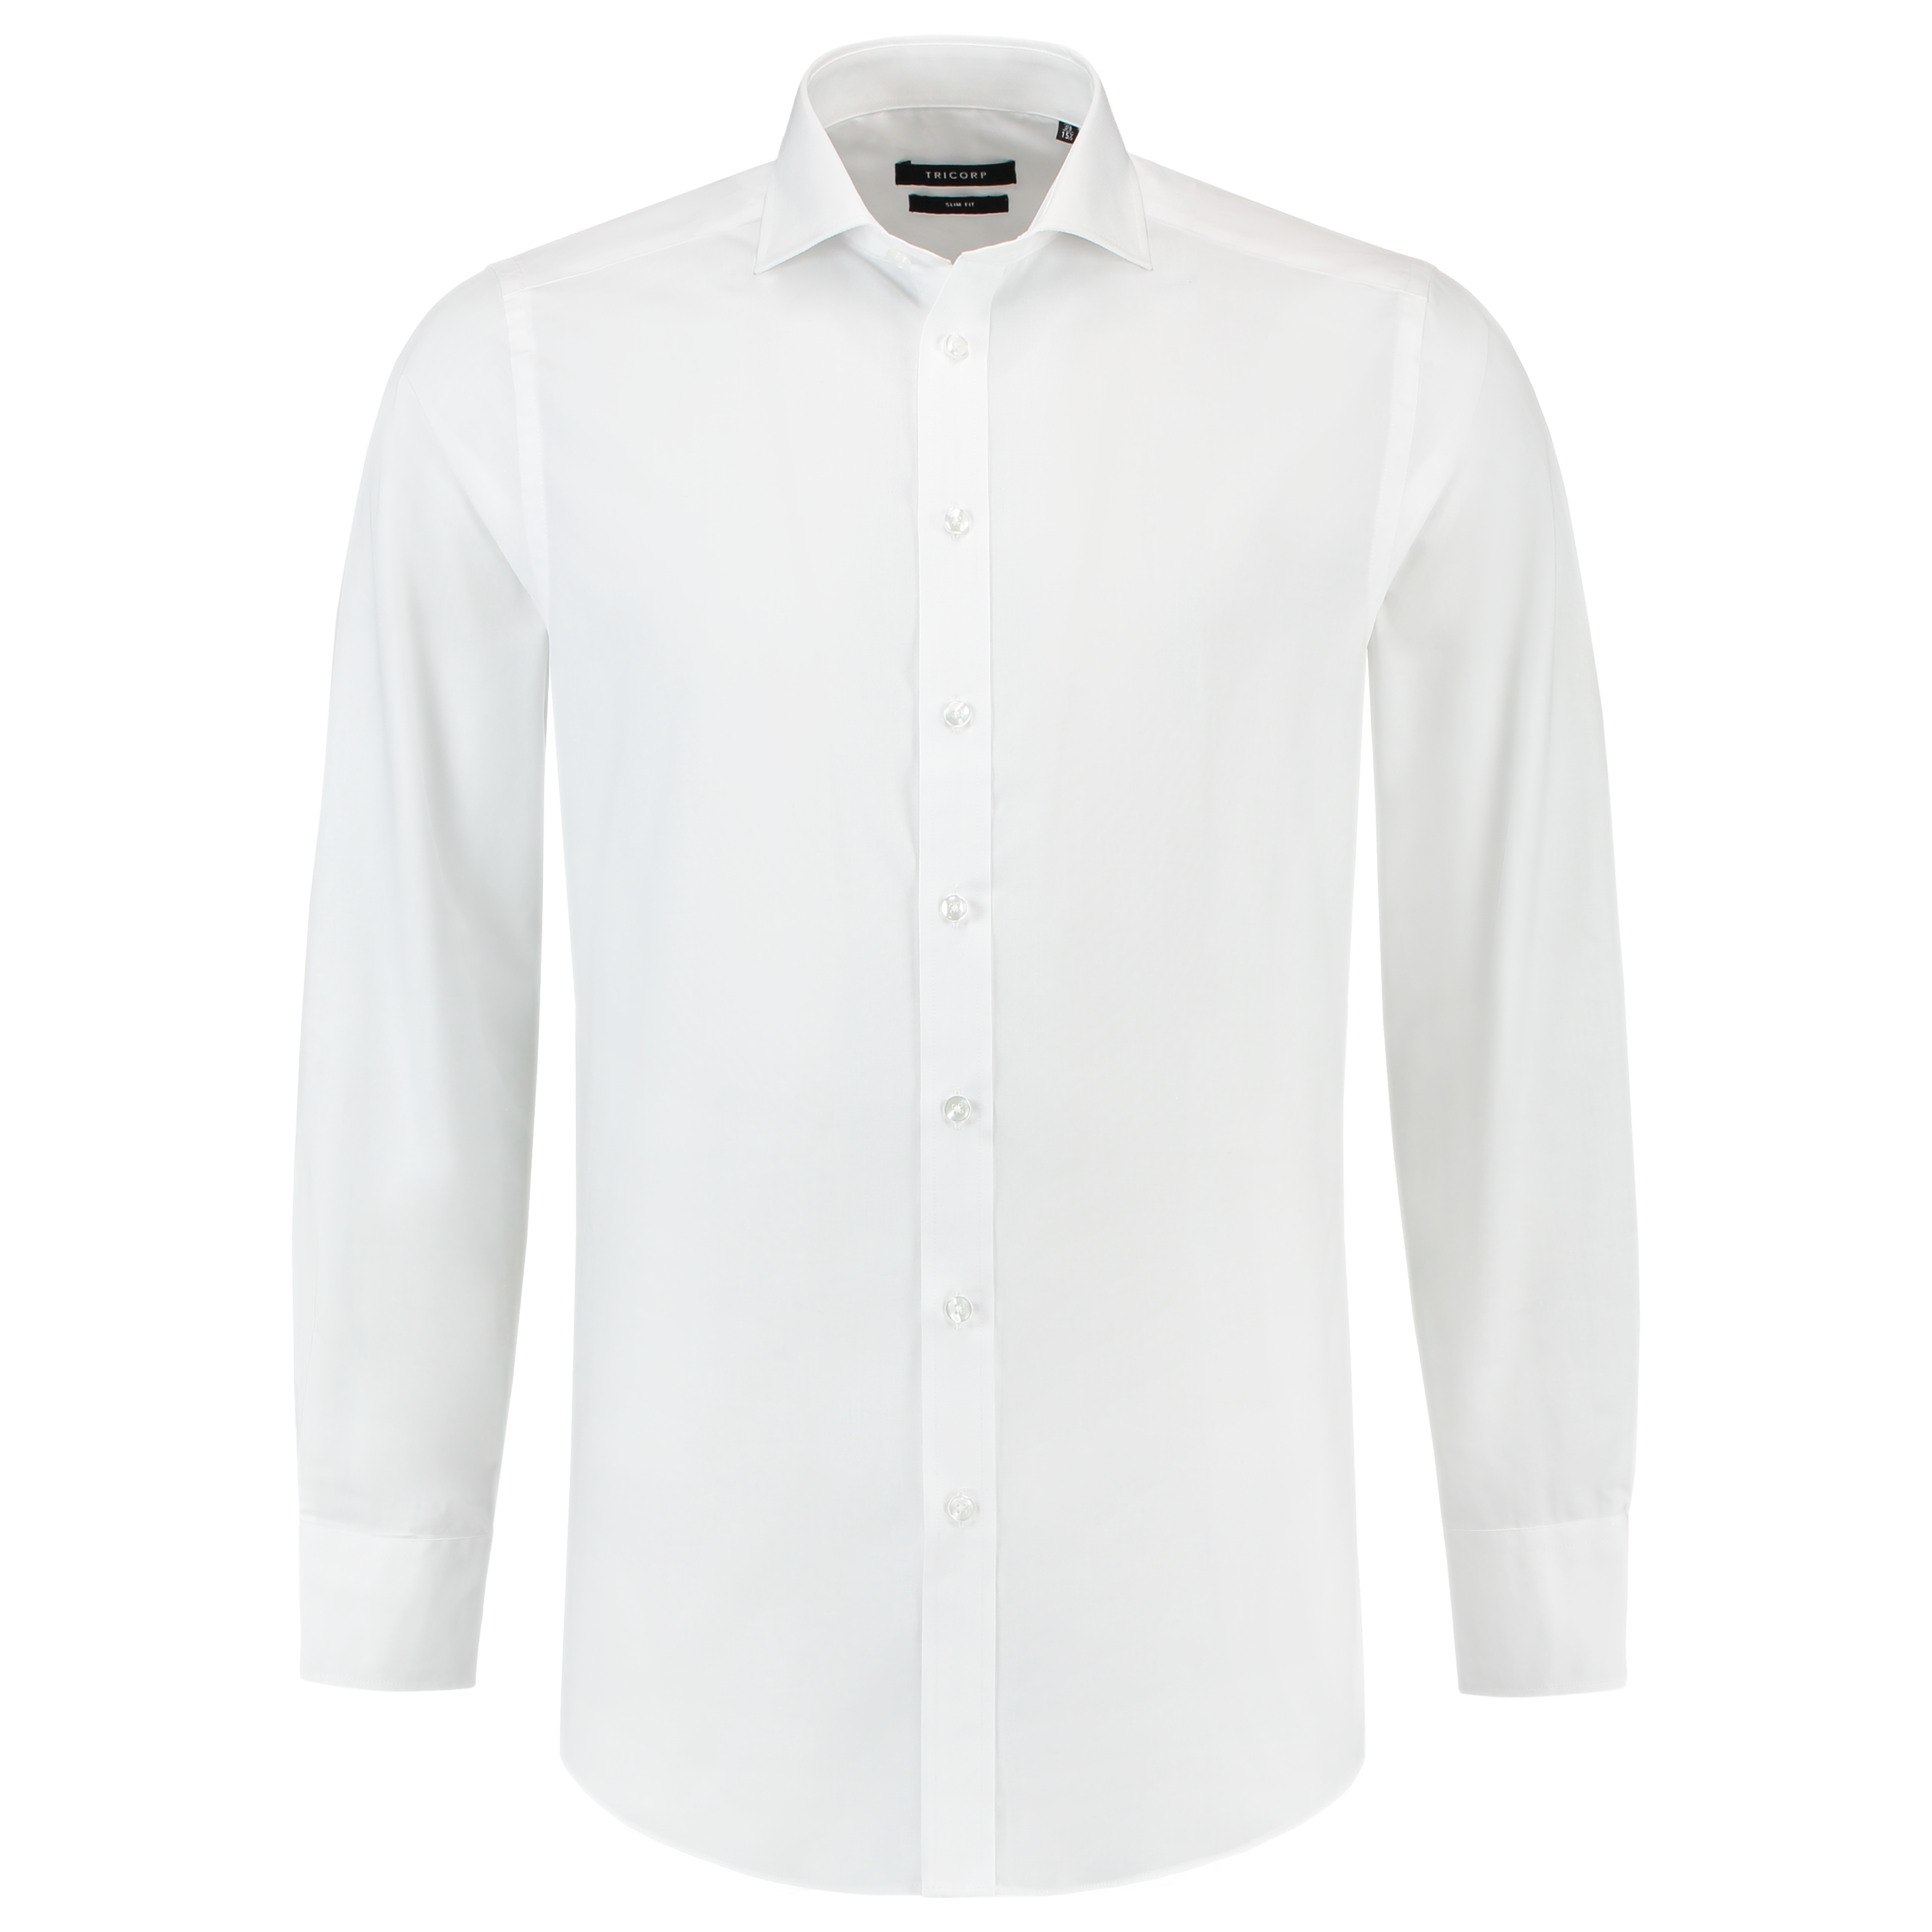 Oxford shirt fitted